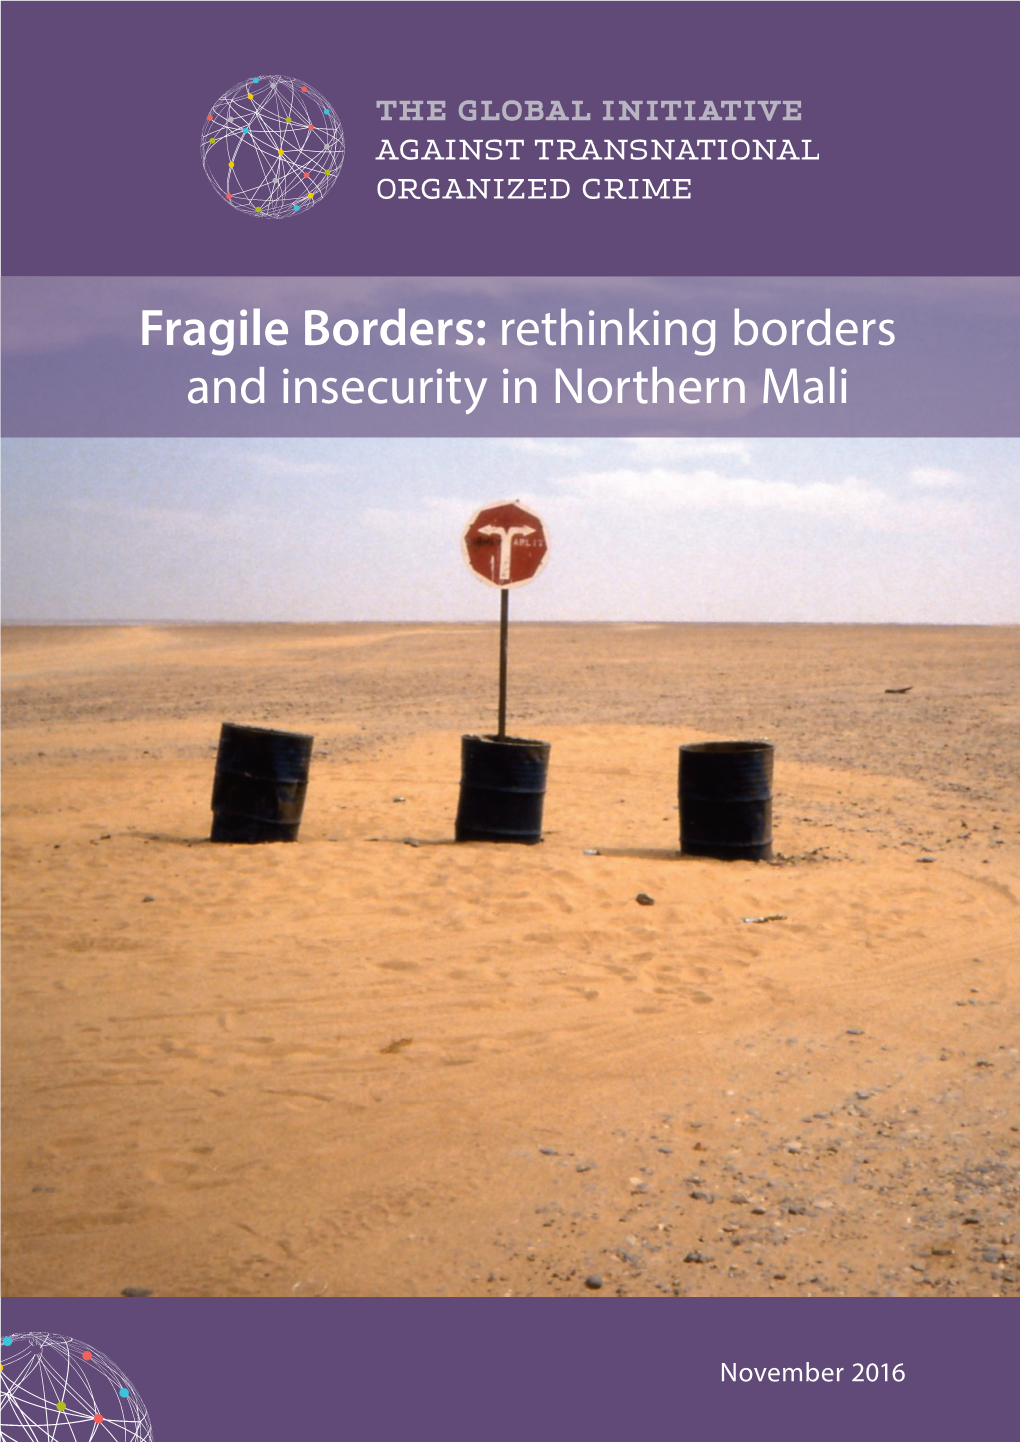 Rethinking Borders and Insecurity in Northern Mali